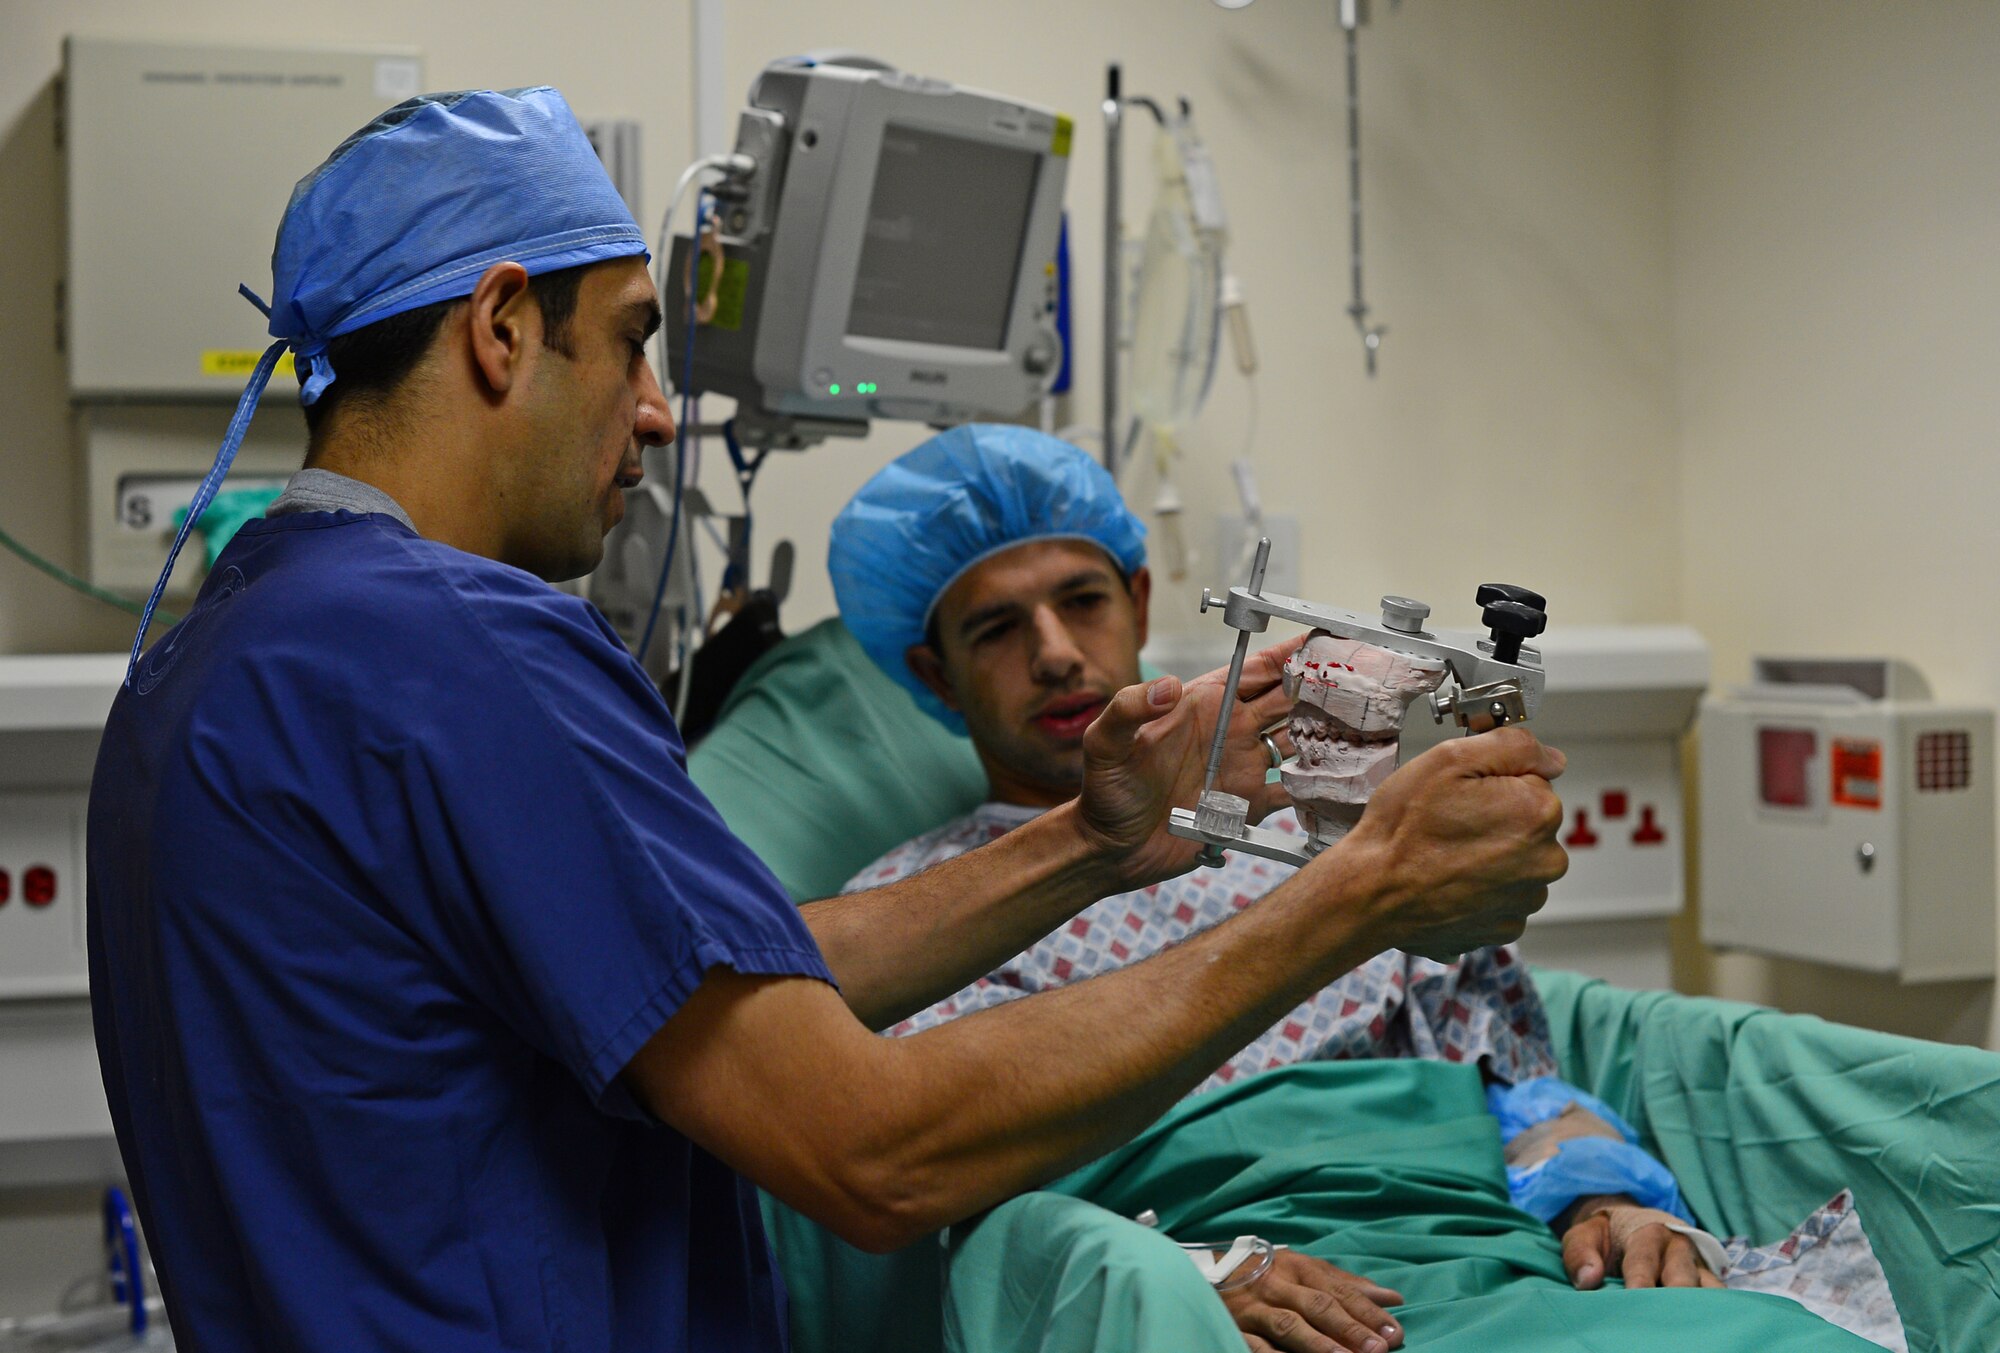 Lt. Col. Khurram Shahzad, 48th Dental Squadron oral maxillofacial surgeon, shows a jaw anatomy model to Senior Airman Trevor McBride, 48th Fighter Wing Public Affairs photojournalist, before an orthognathic facial surgery in the hospital at Royal Air Force Lakenheath, England, July 9, 2015. The procedure is performed to correct jaw and facial conditions, which can affect breathing, induce sleep apnea and cause difficulty eating. (U.S. Air Force photo by Senior Airman Erin O’Shea/Released) 